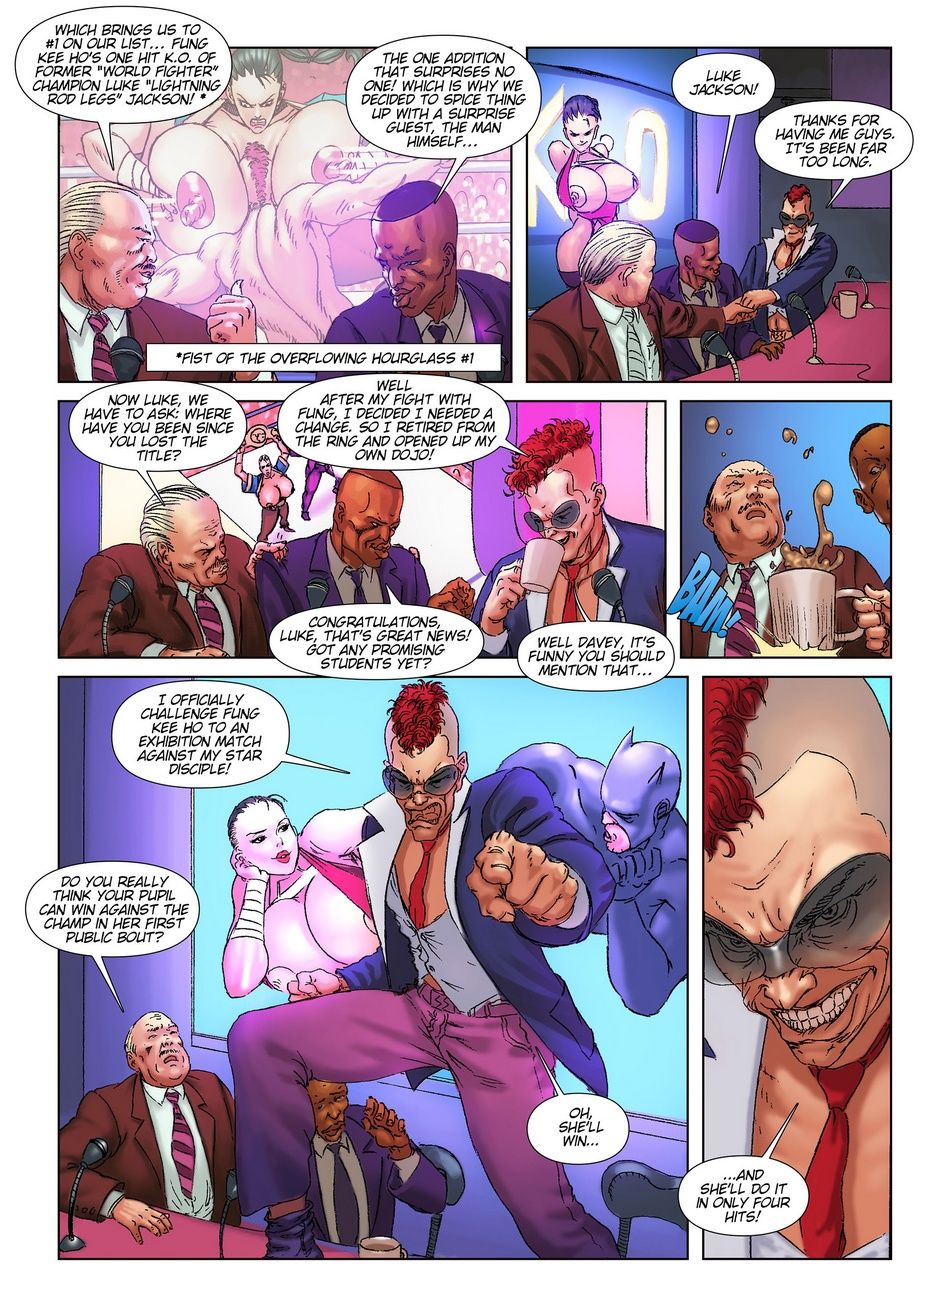 Fist Of The Overflowing Hourglass 2 page 4